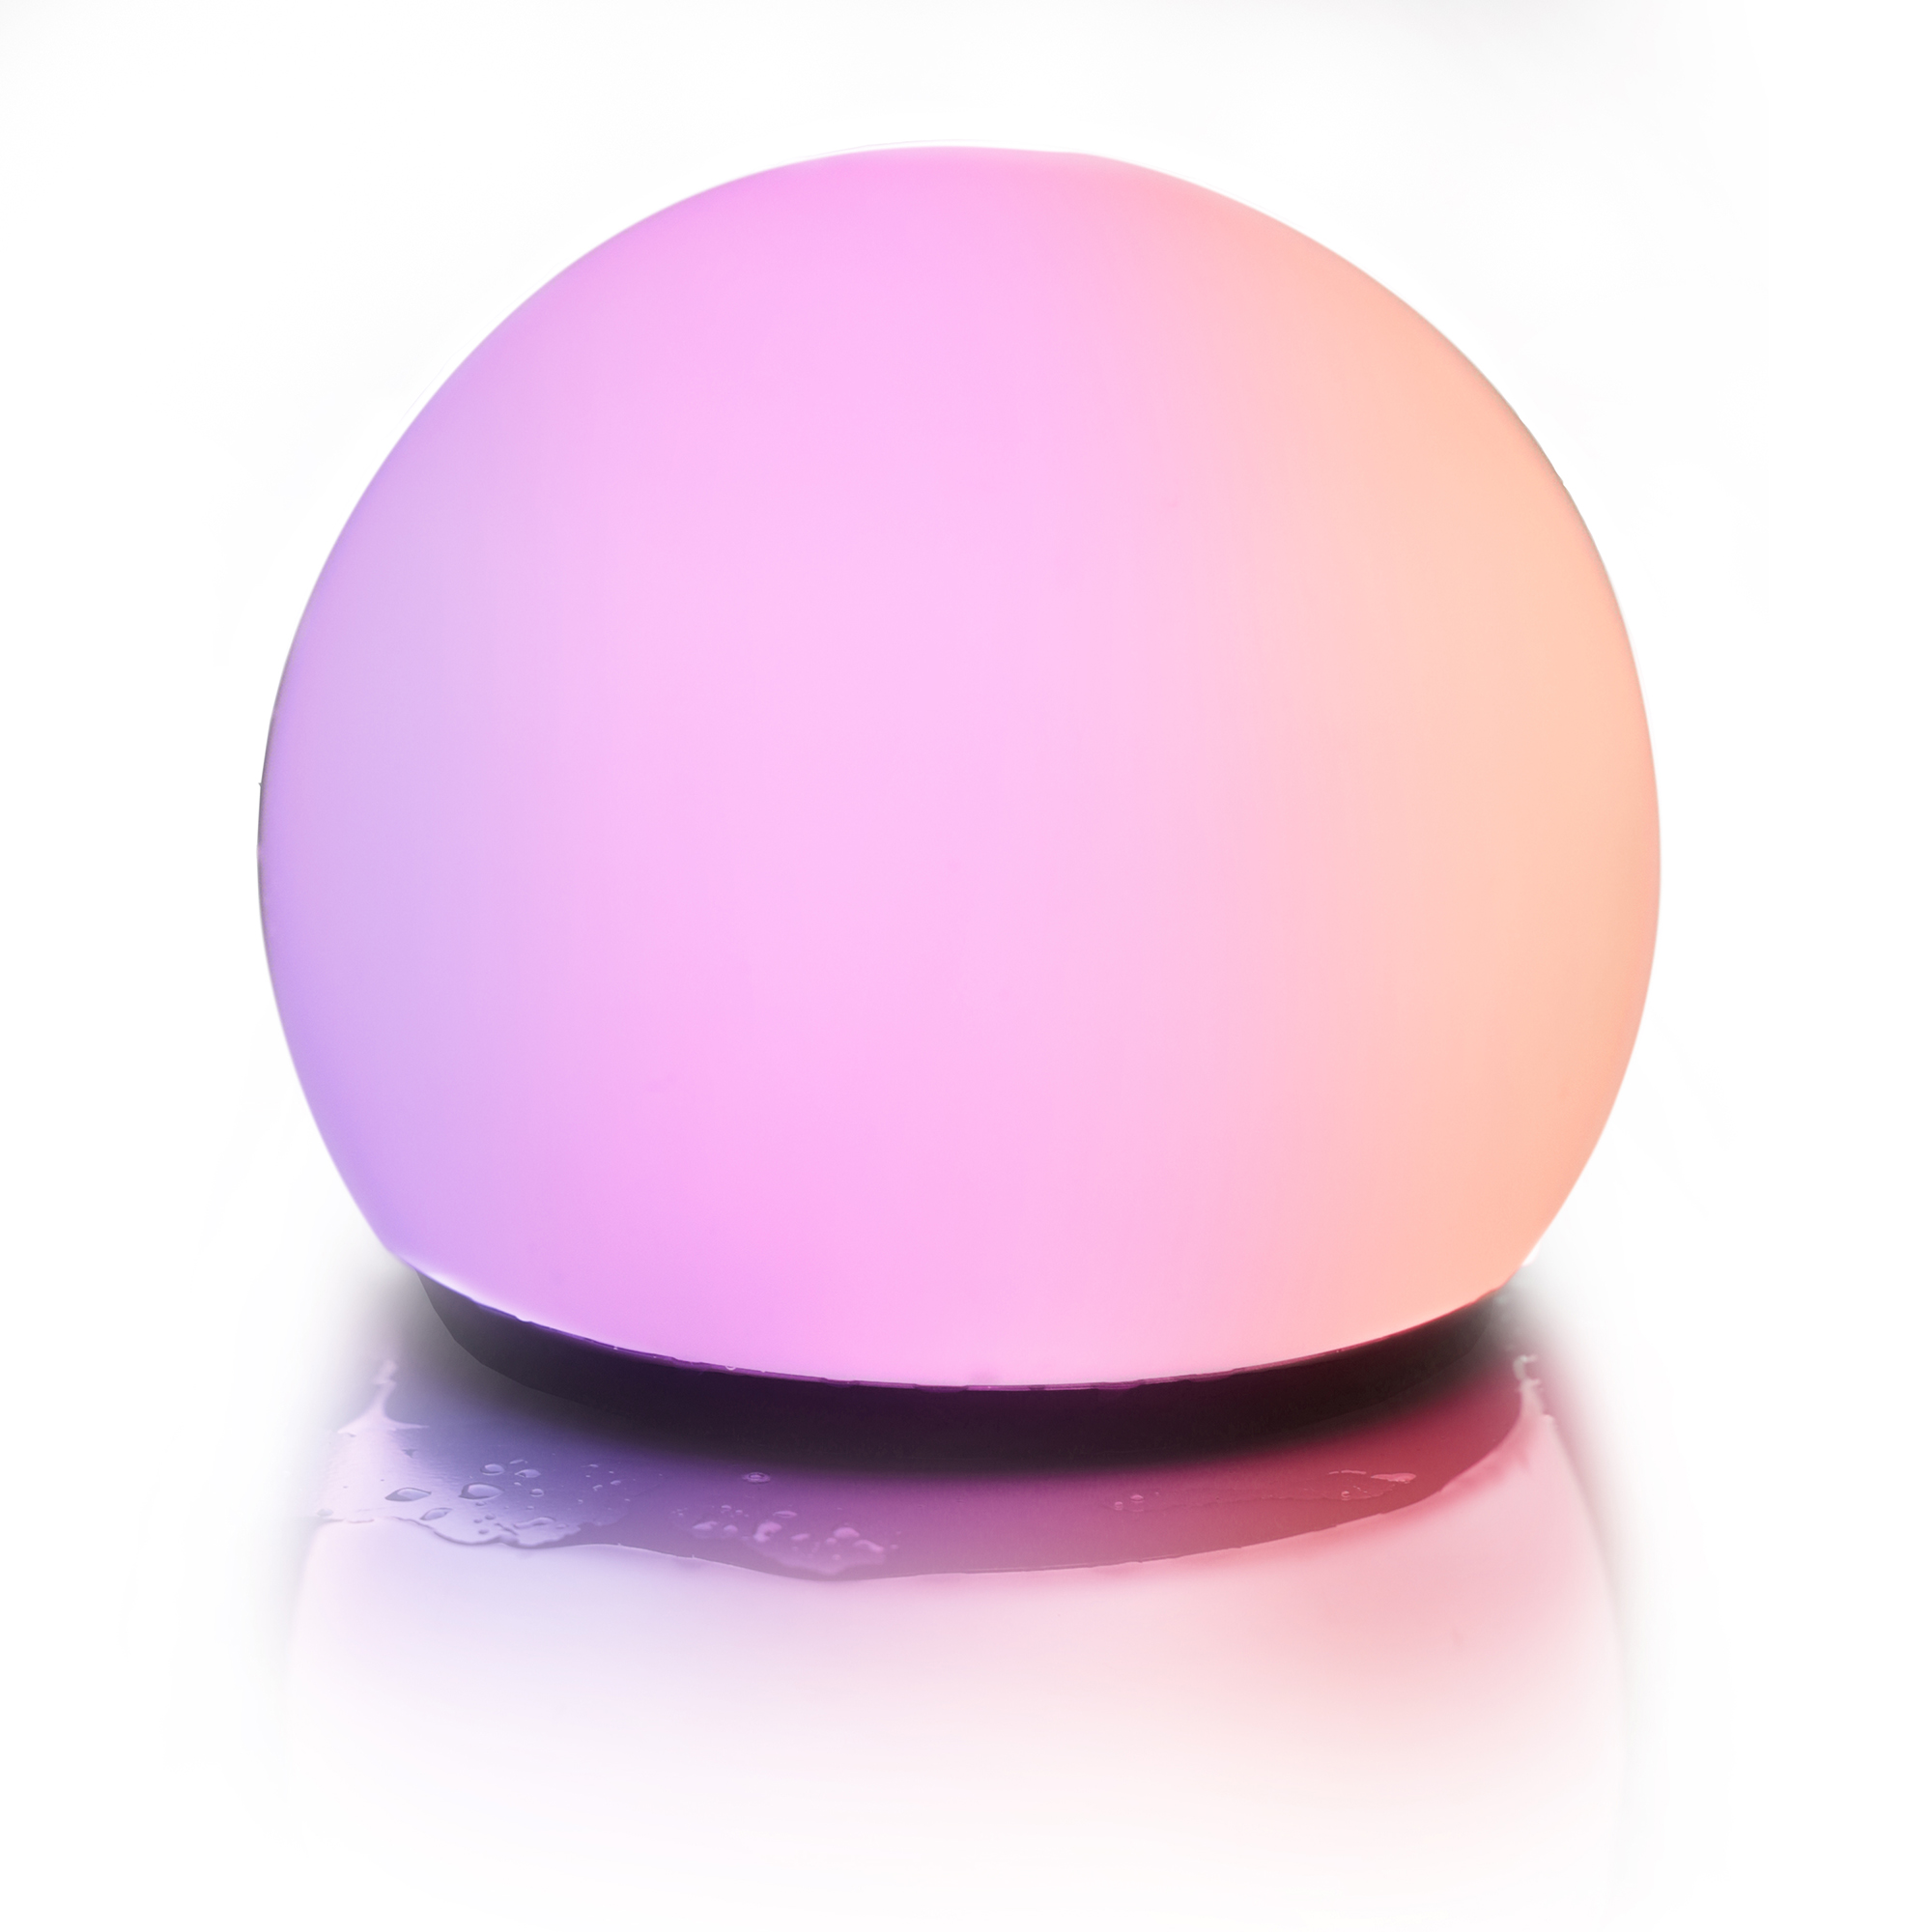 7′ Orb+ Smart Portable LED Light, Swirling Multi-Color Lighting, Indoor/ Outdoor, Touch-Control - Monster Illuminessence